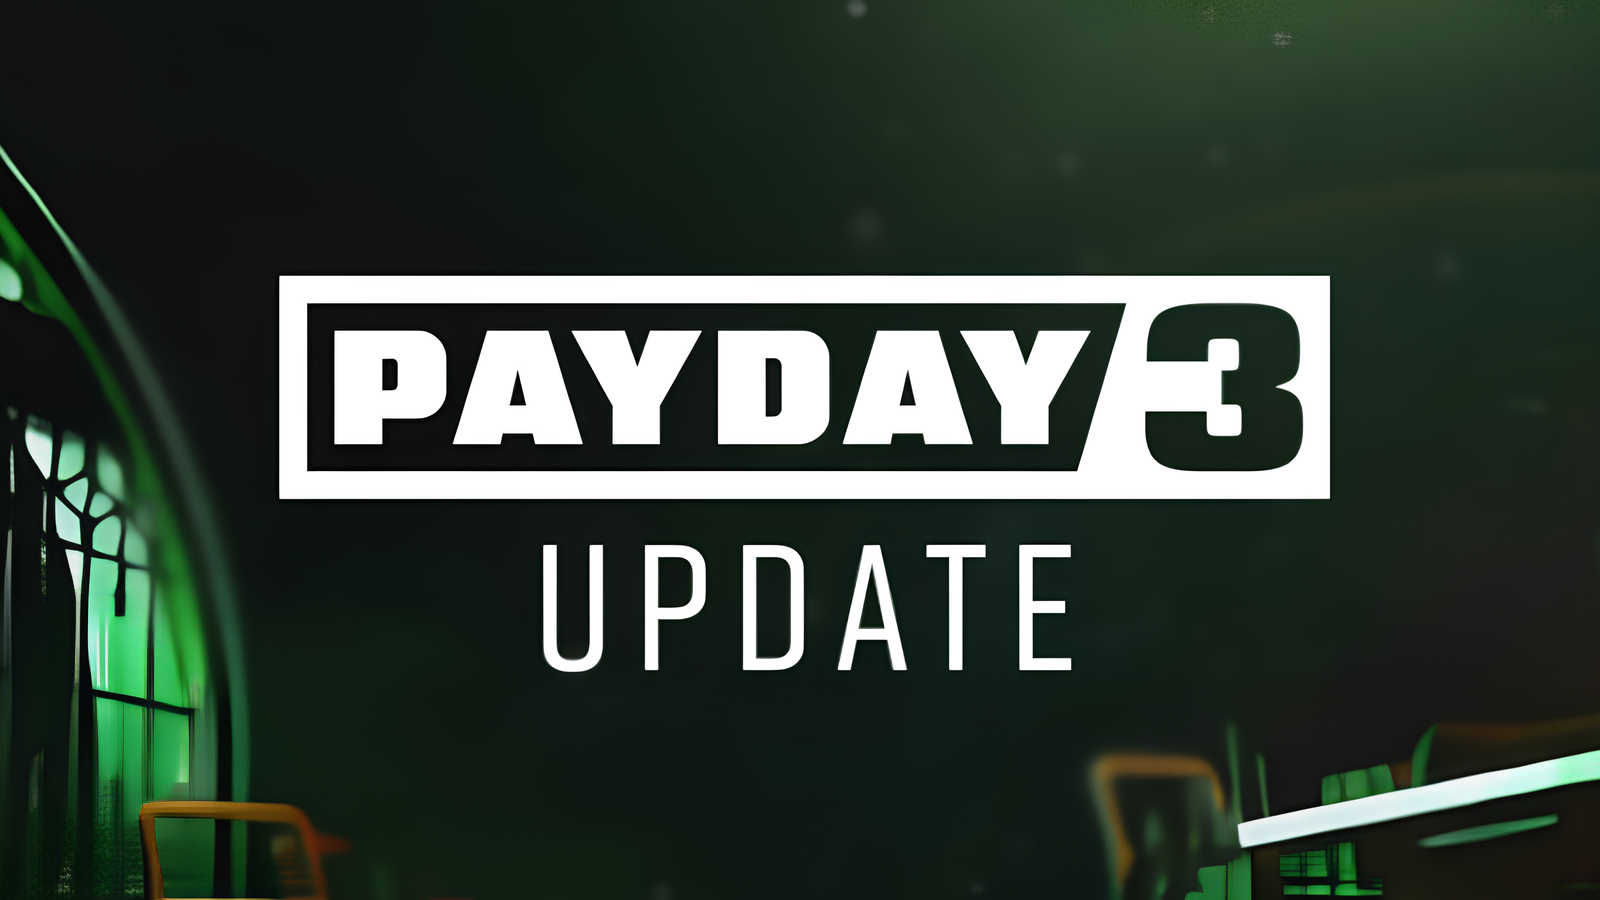 Payday 3 is going offline again, with scheduled maintenance planned for today and Friday!